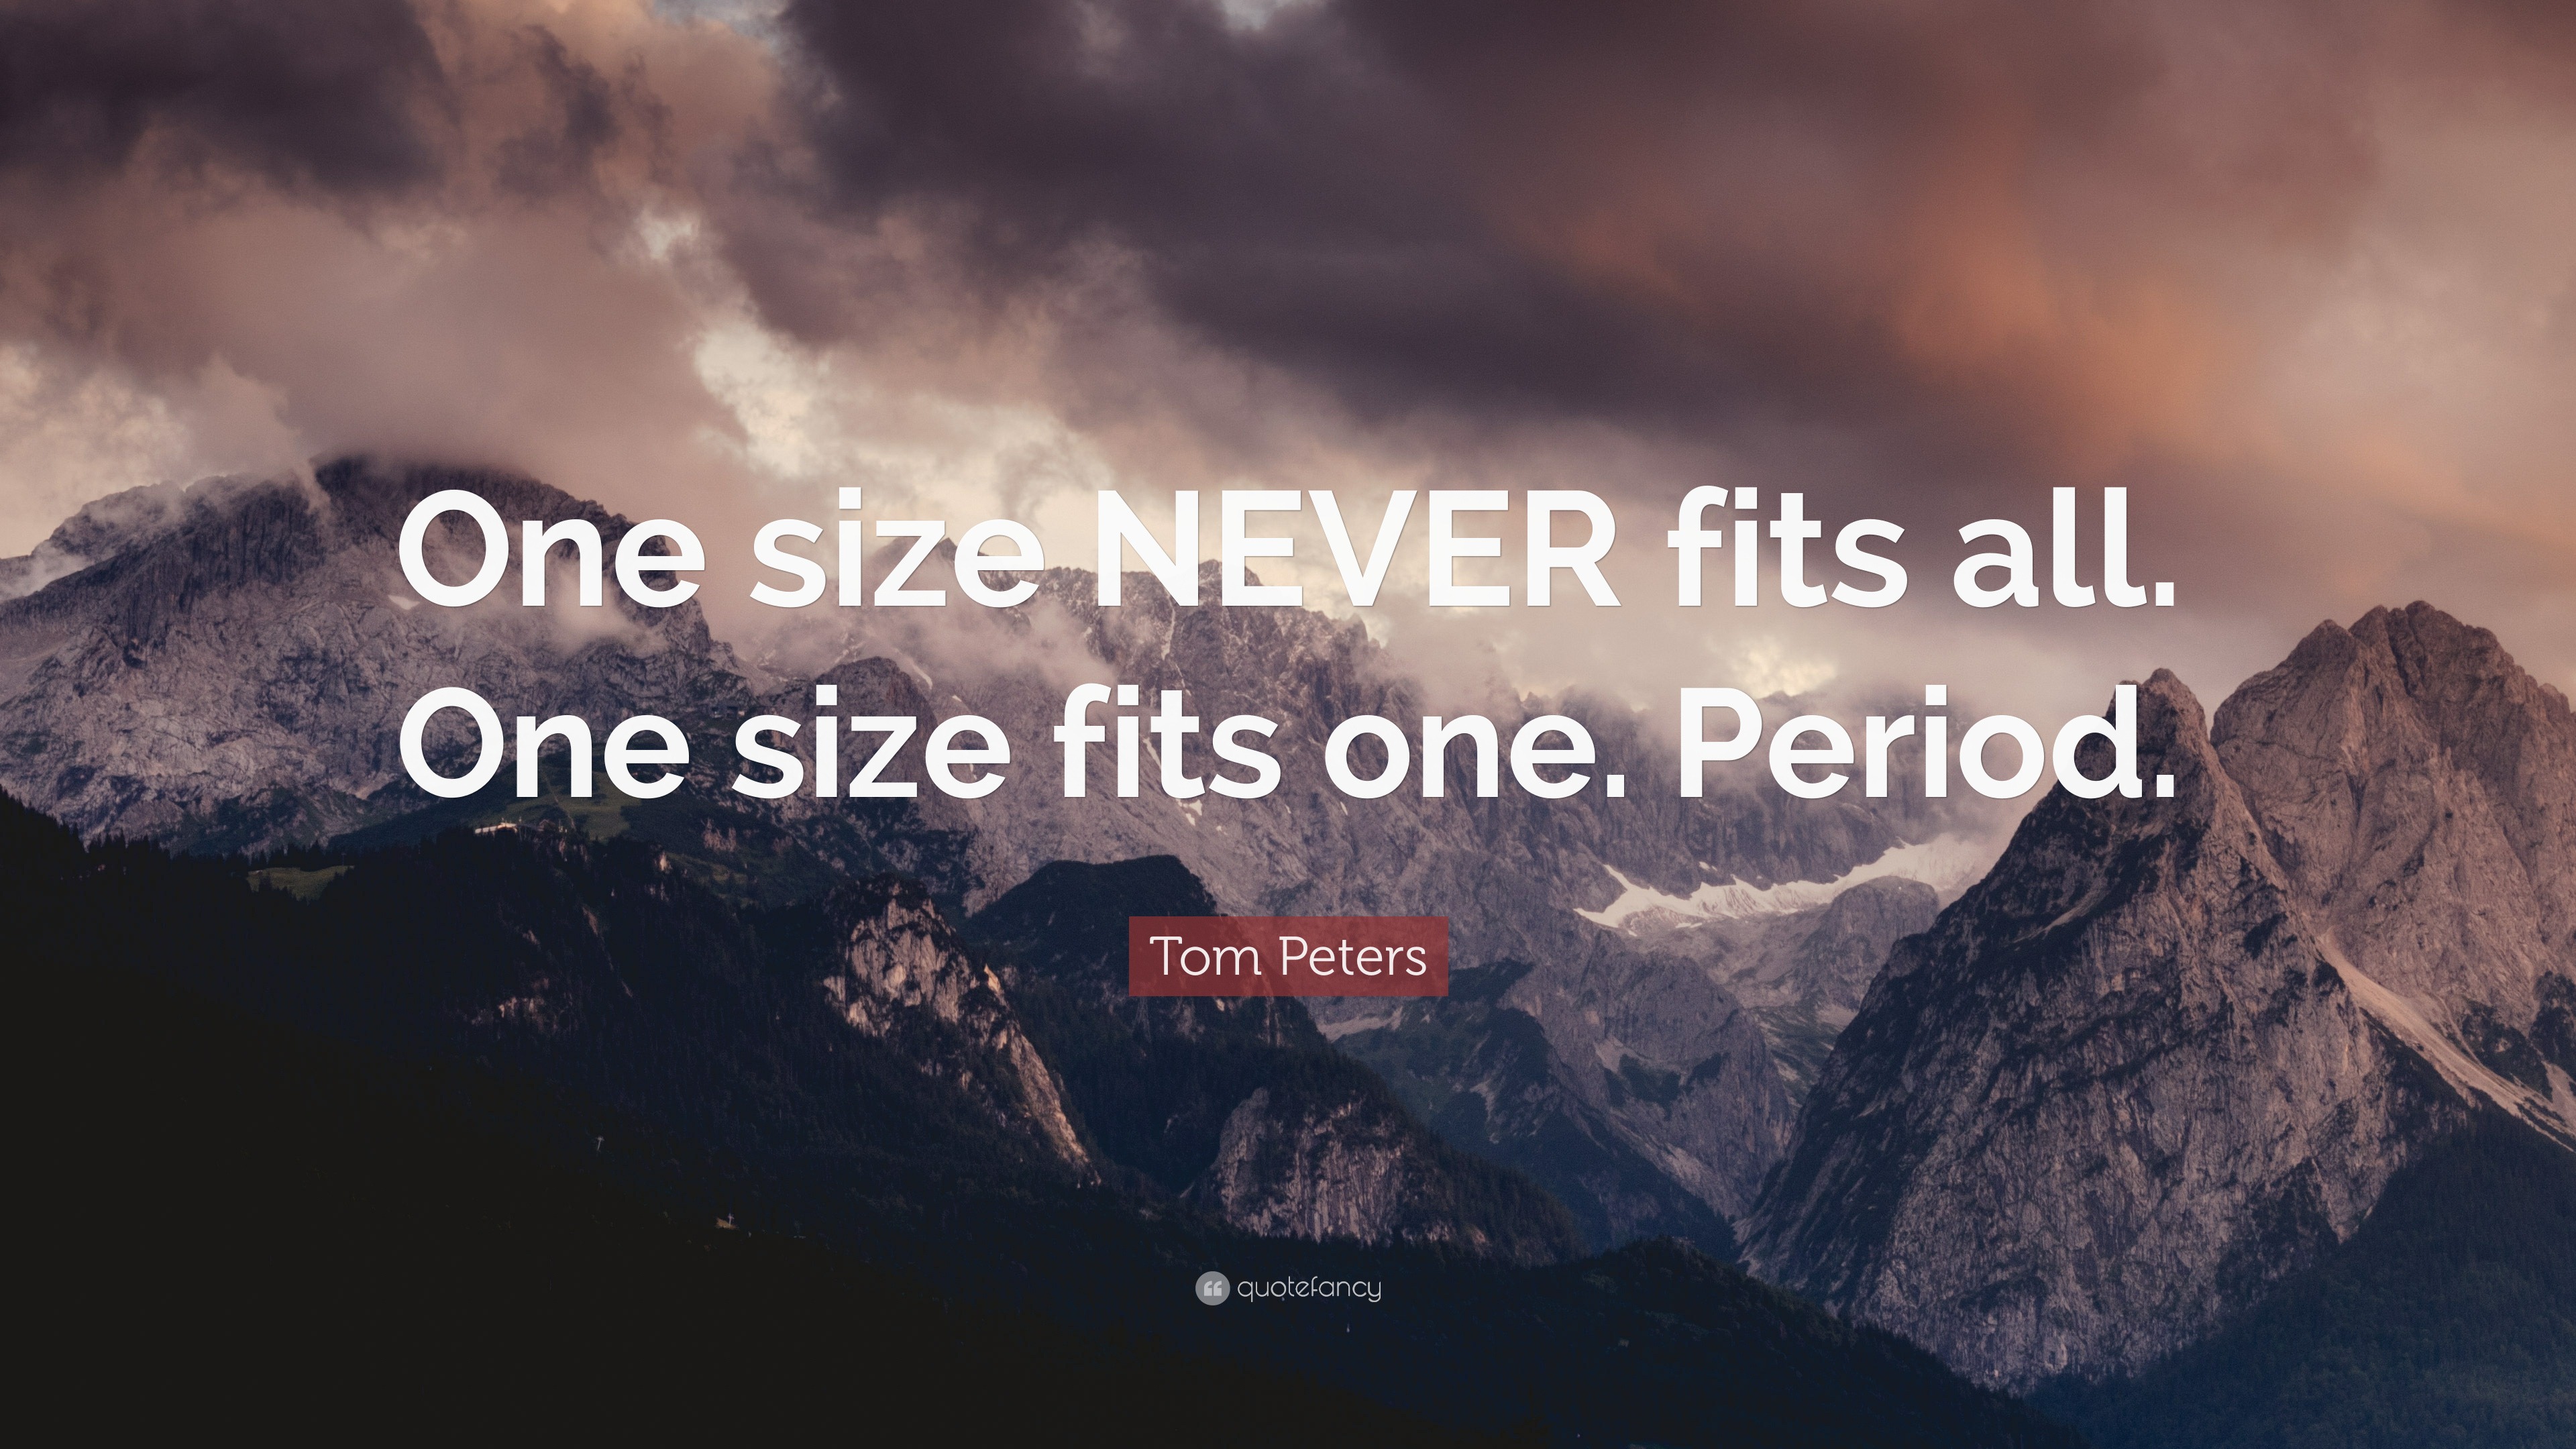 Tom Peters Quote: “One size NEVER fits all. One size fits one